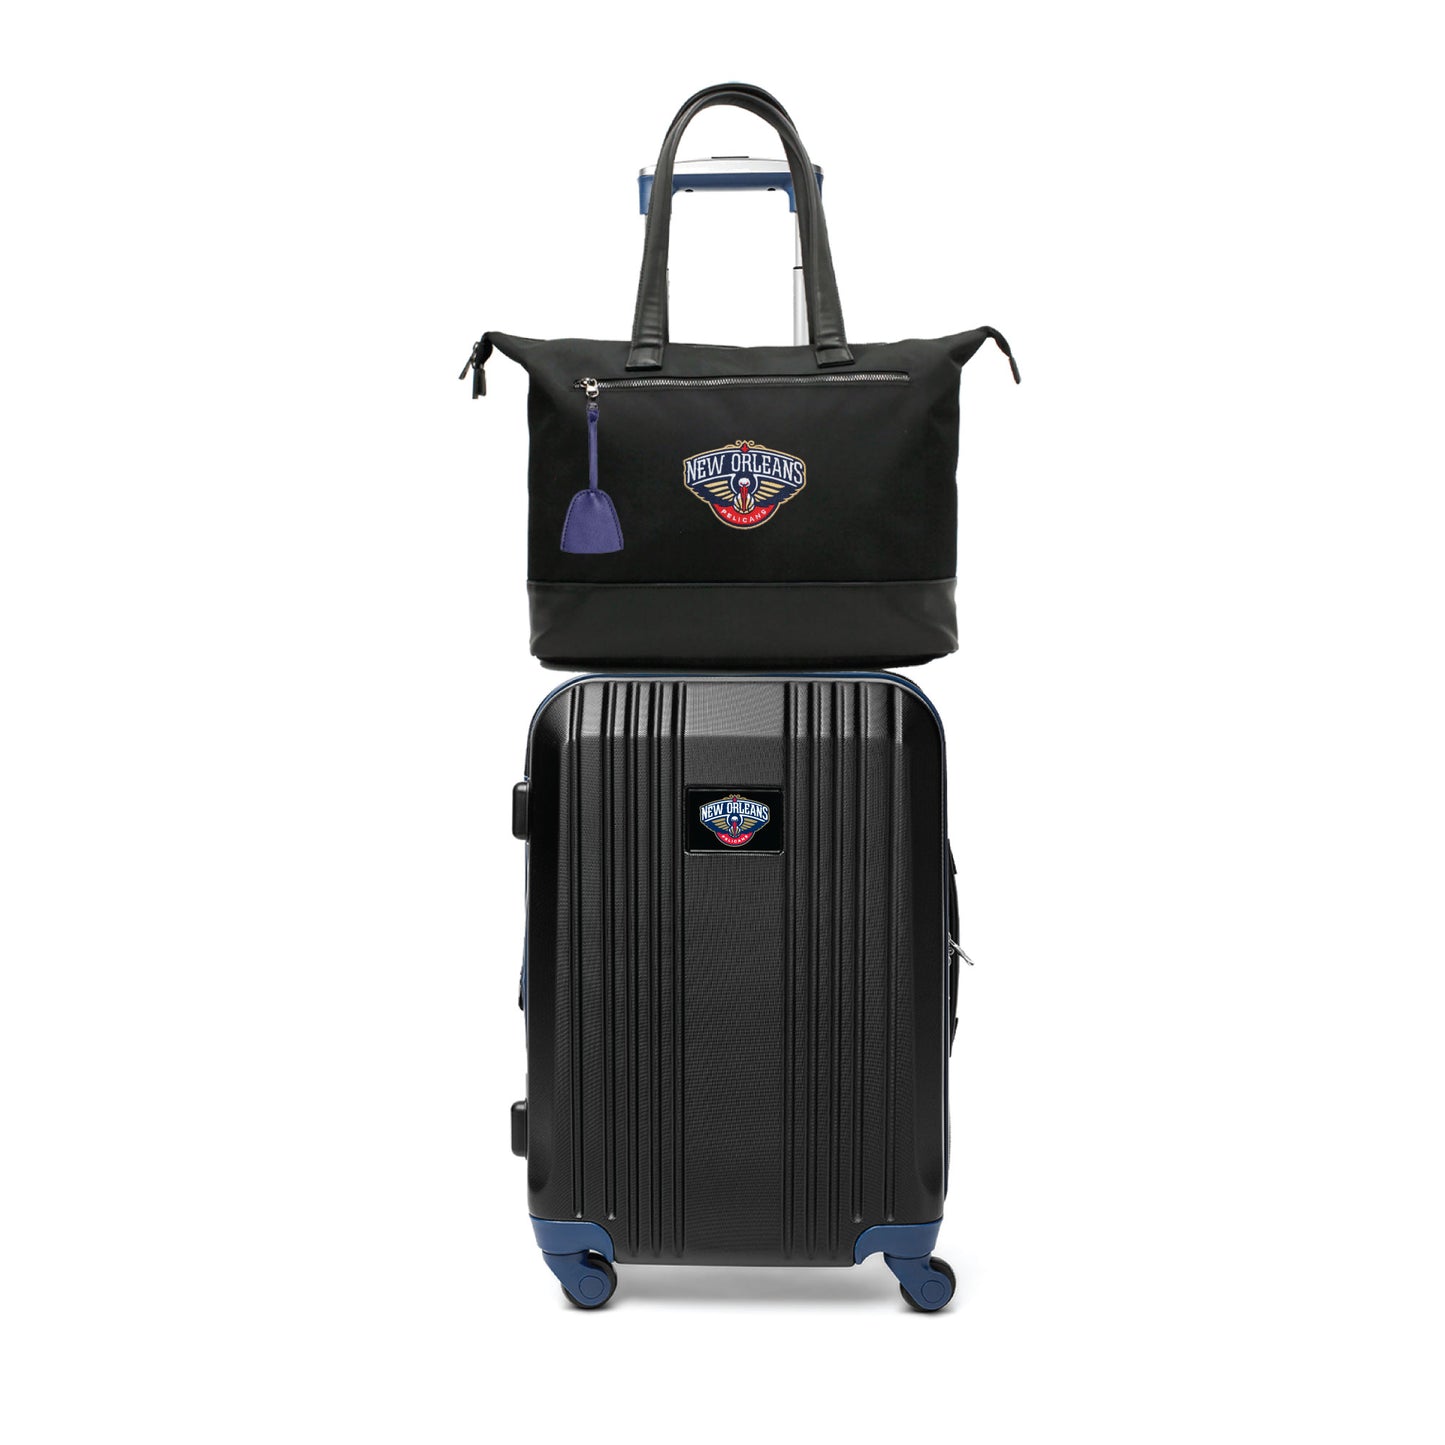 New Orleans Pelicans Premium Laptop Tote Bag and Luggage Set